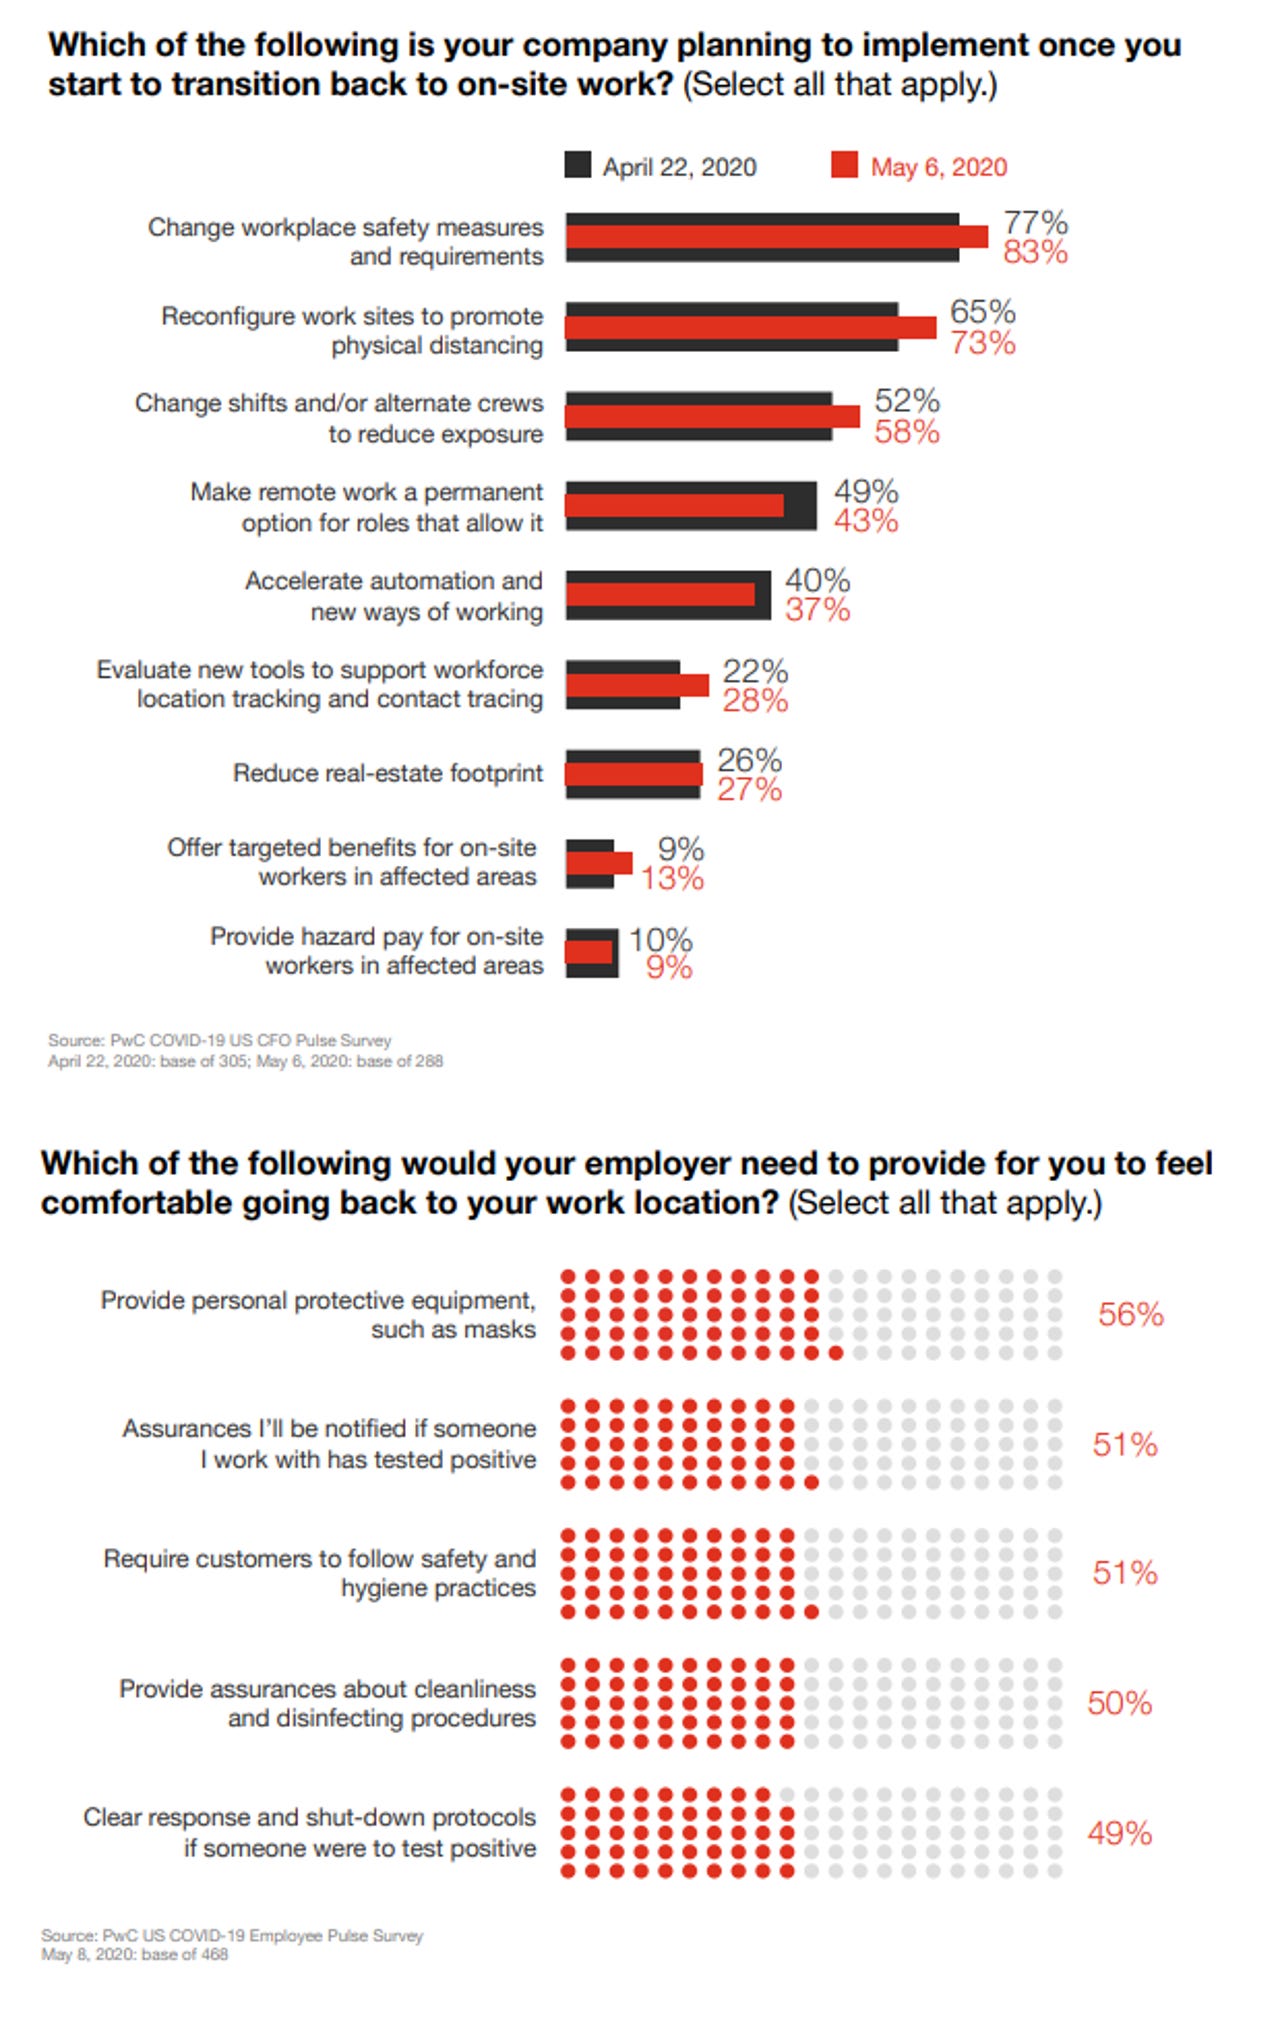 cfo-pwc-survey-overview-may-11-2020.png